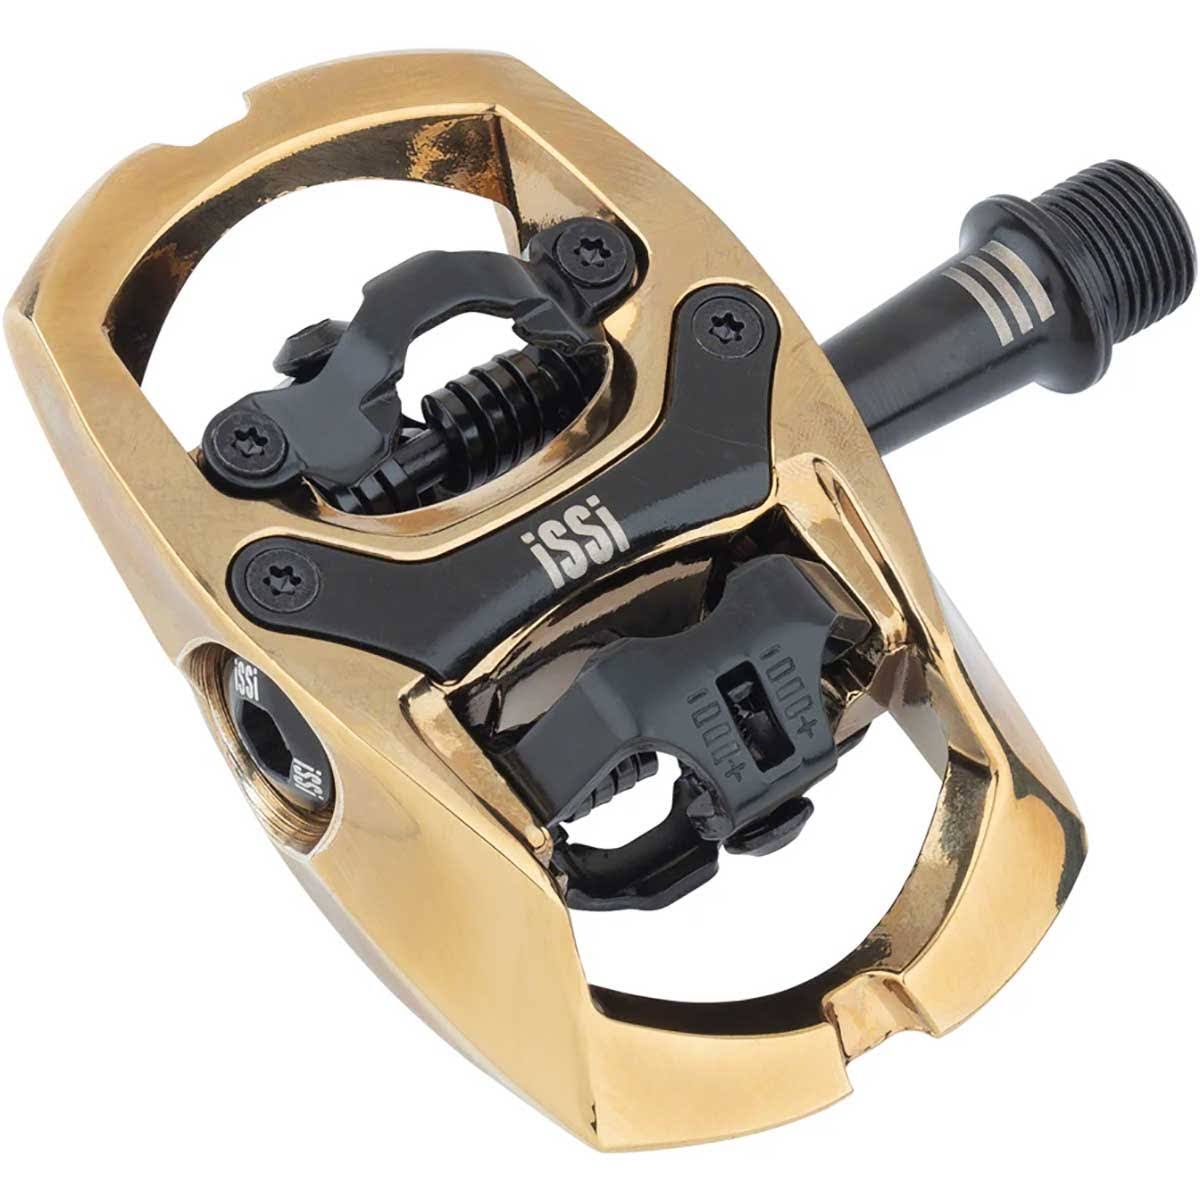 ISSI Trail III Pedals - Dual Sided Clipless with Platform Gold